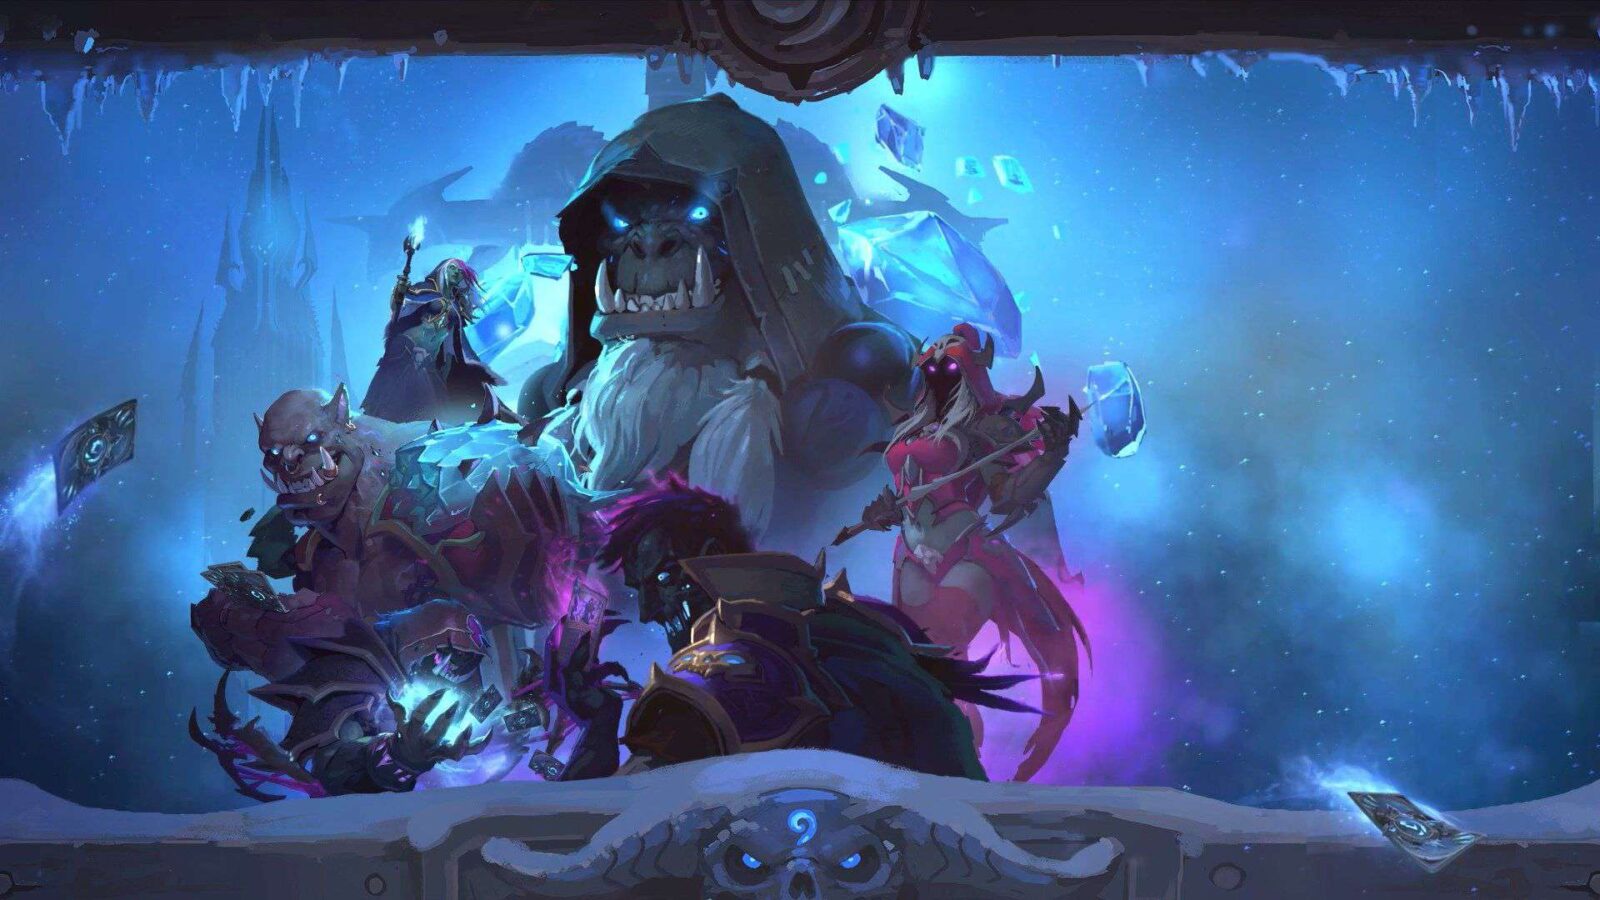 LiveWallpapers4Free.com | Hearthstone Knights of the Frozen Throne - Free Live Wallpaper